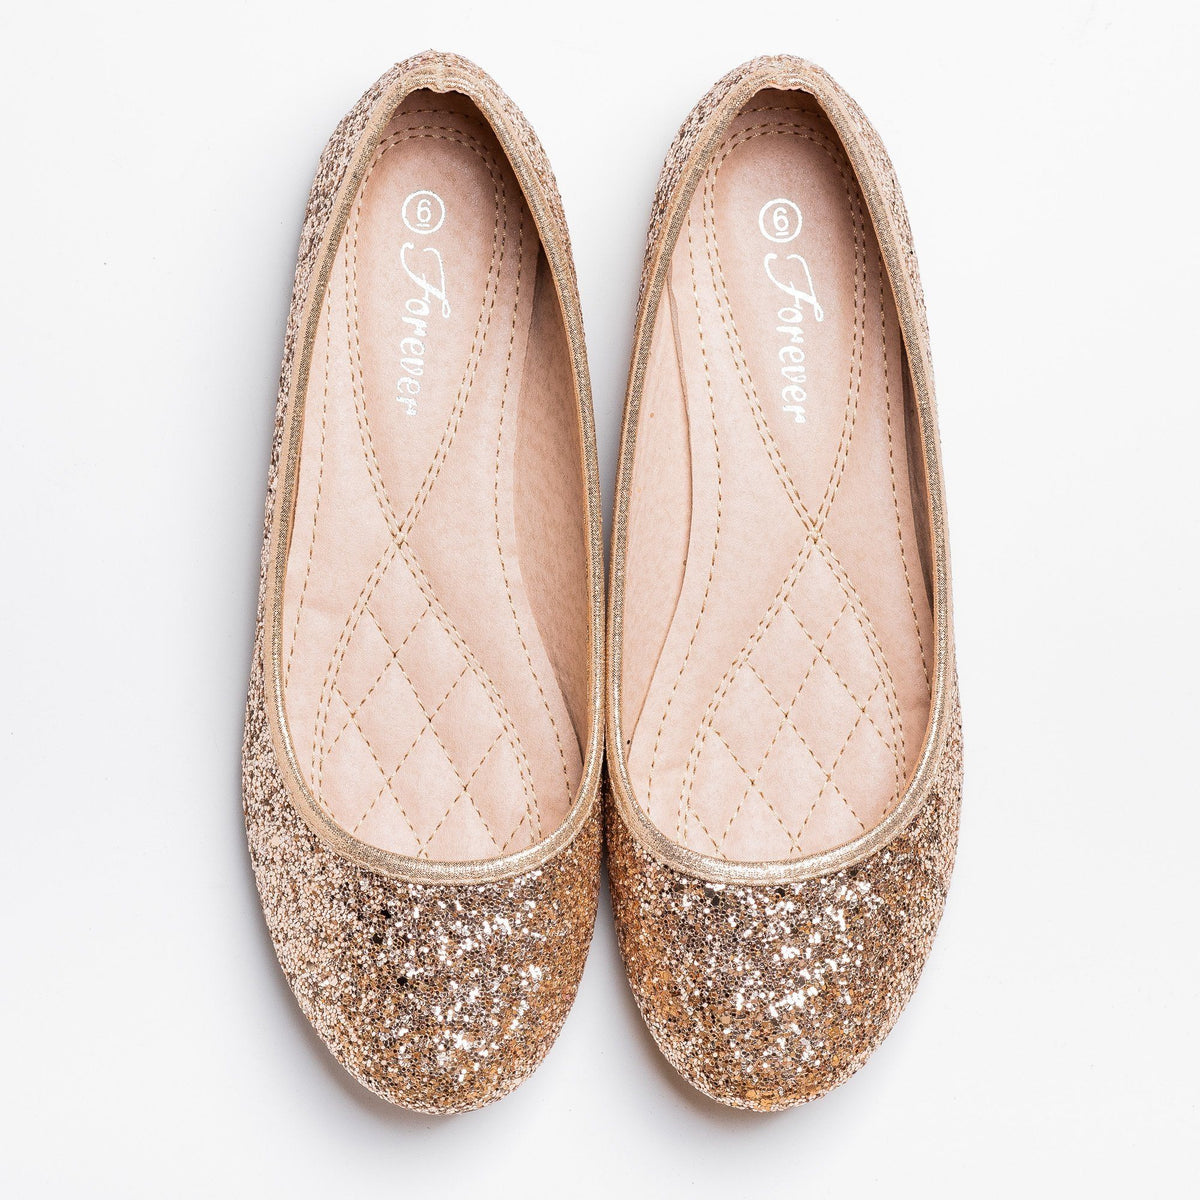 Gorgeous Glitter Flats - Forever Shoes 